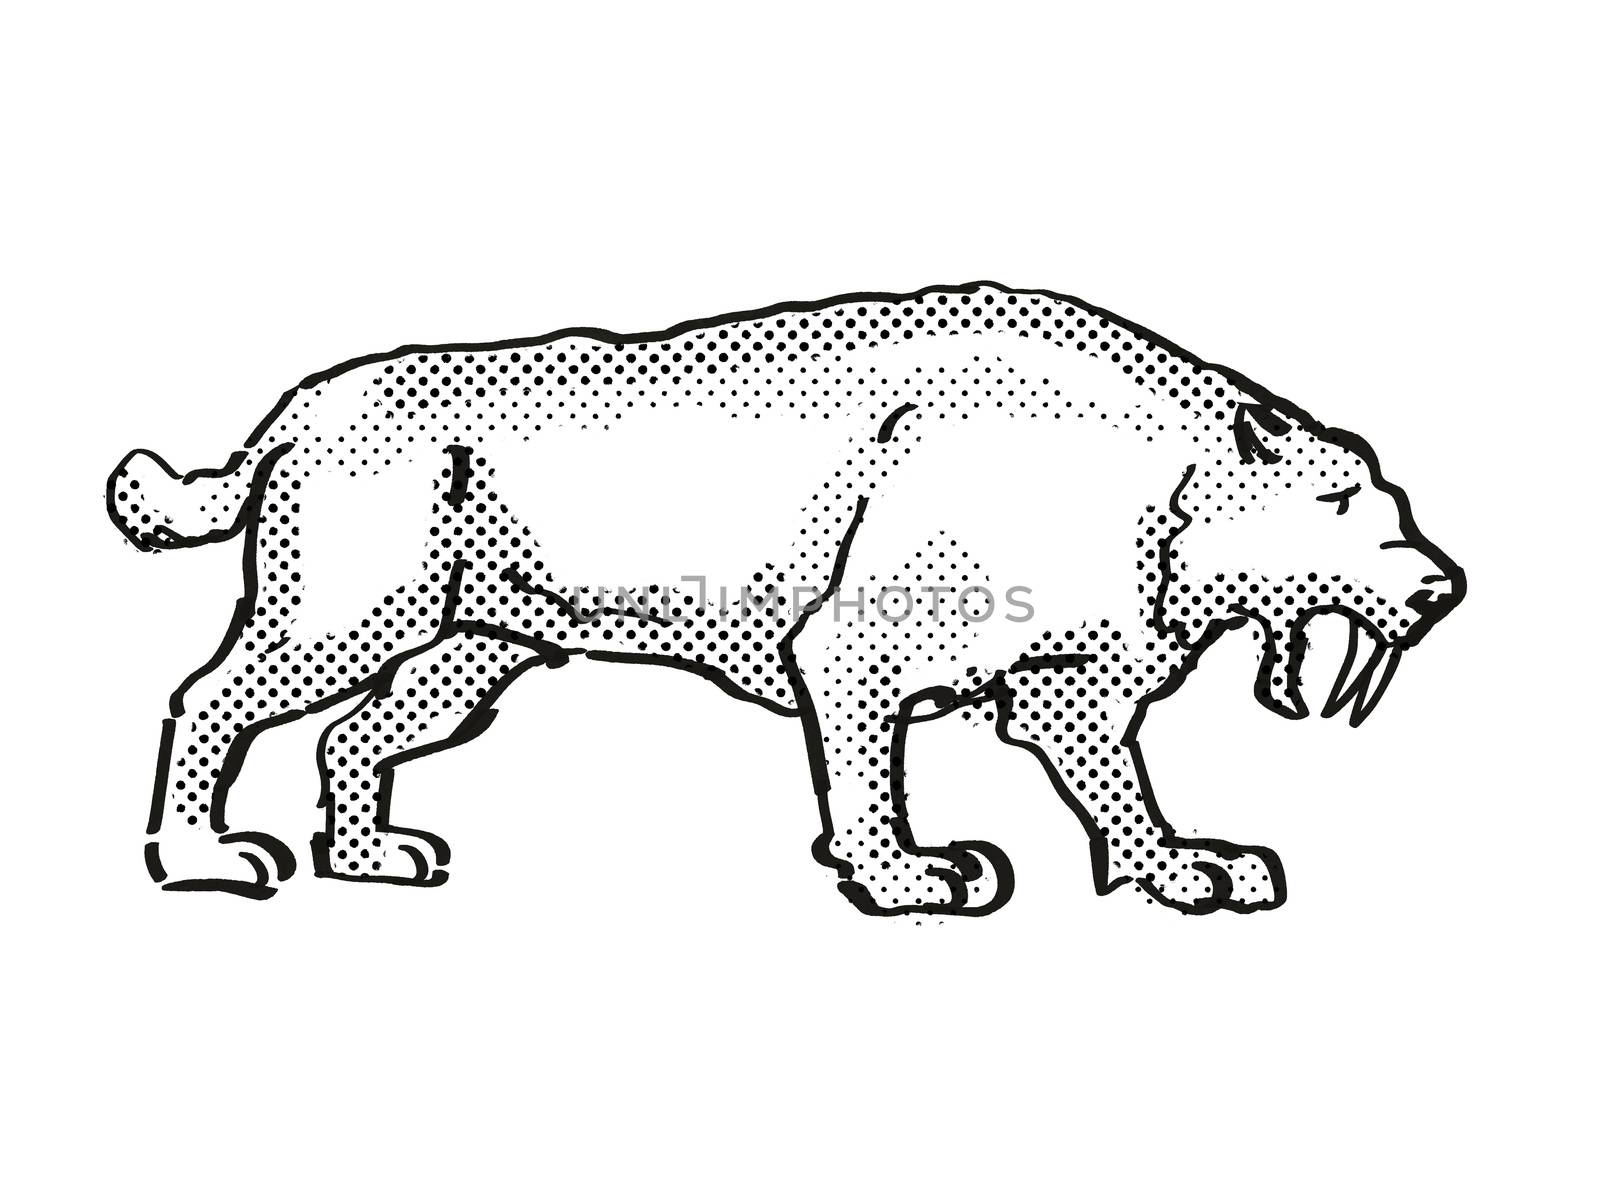 Retro cartoon style drawing of a Smilidon Populator, an extinct North American wildlife species on isolated background done in black and white full body.